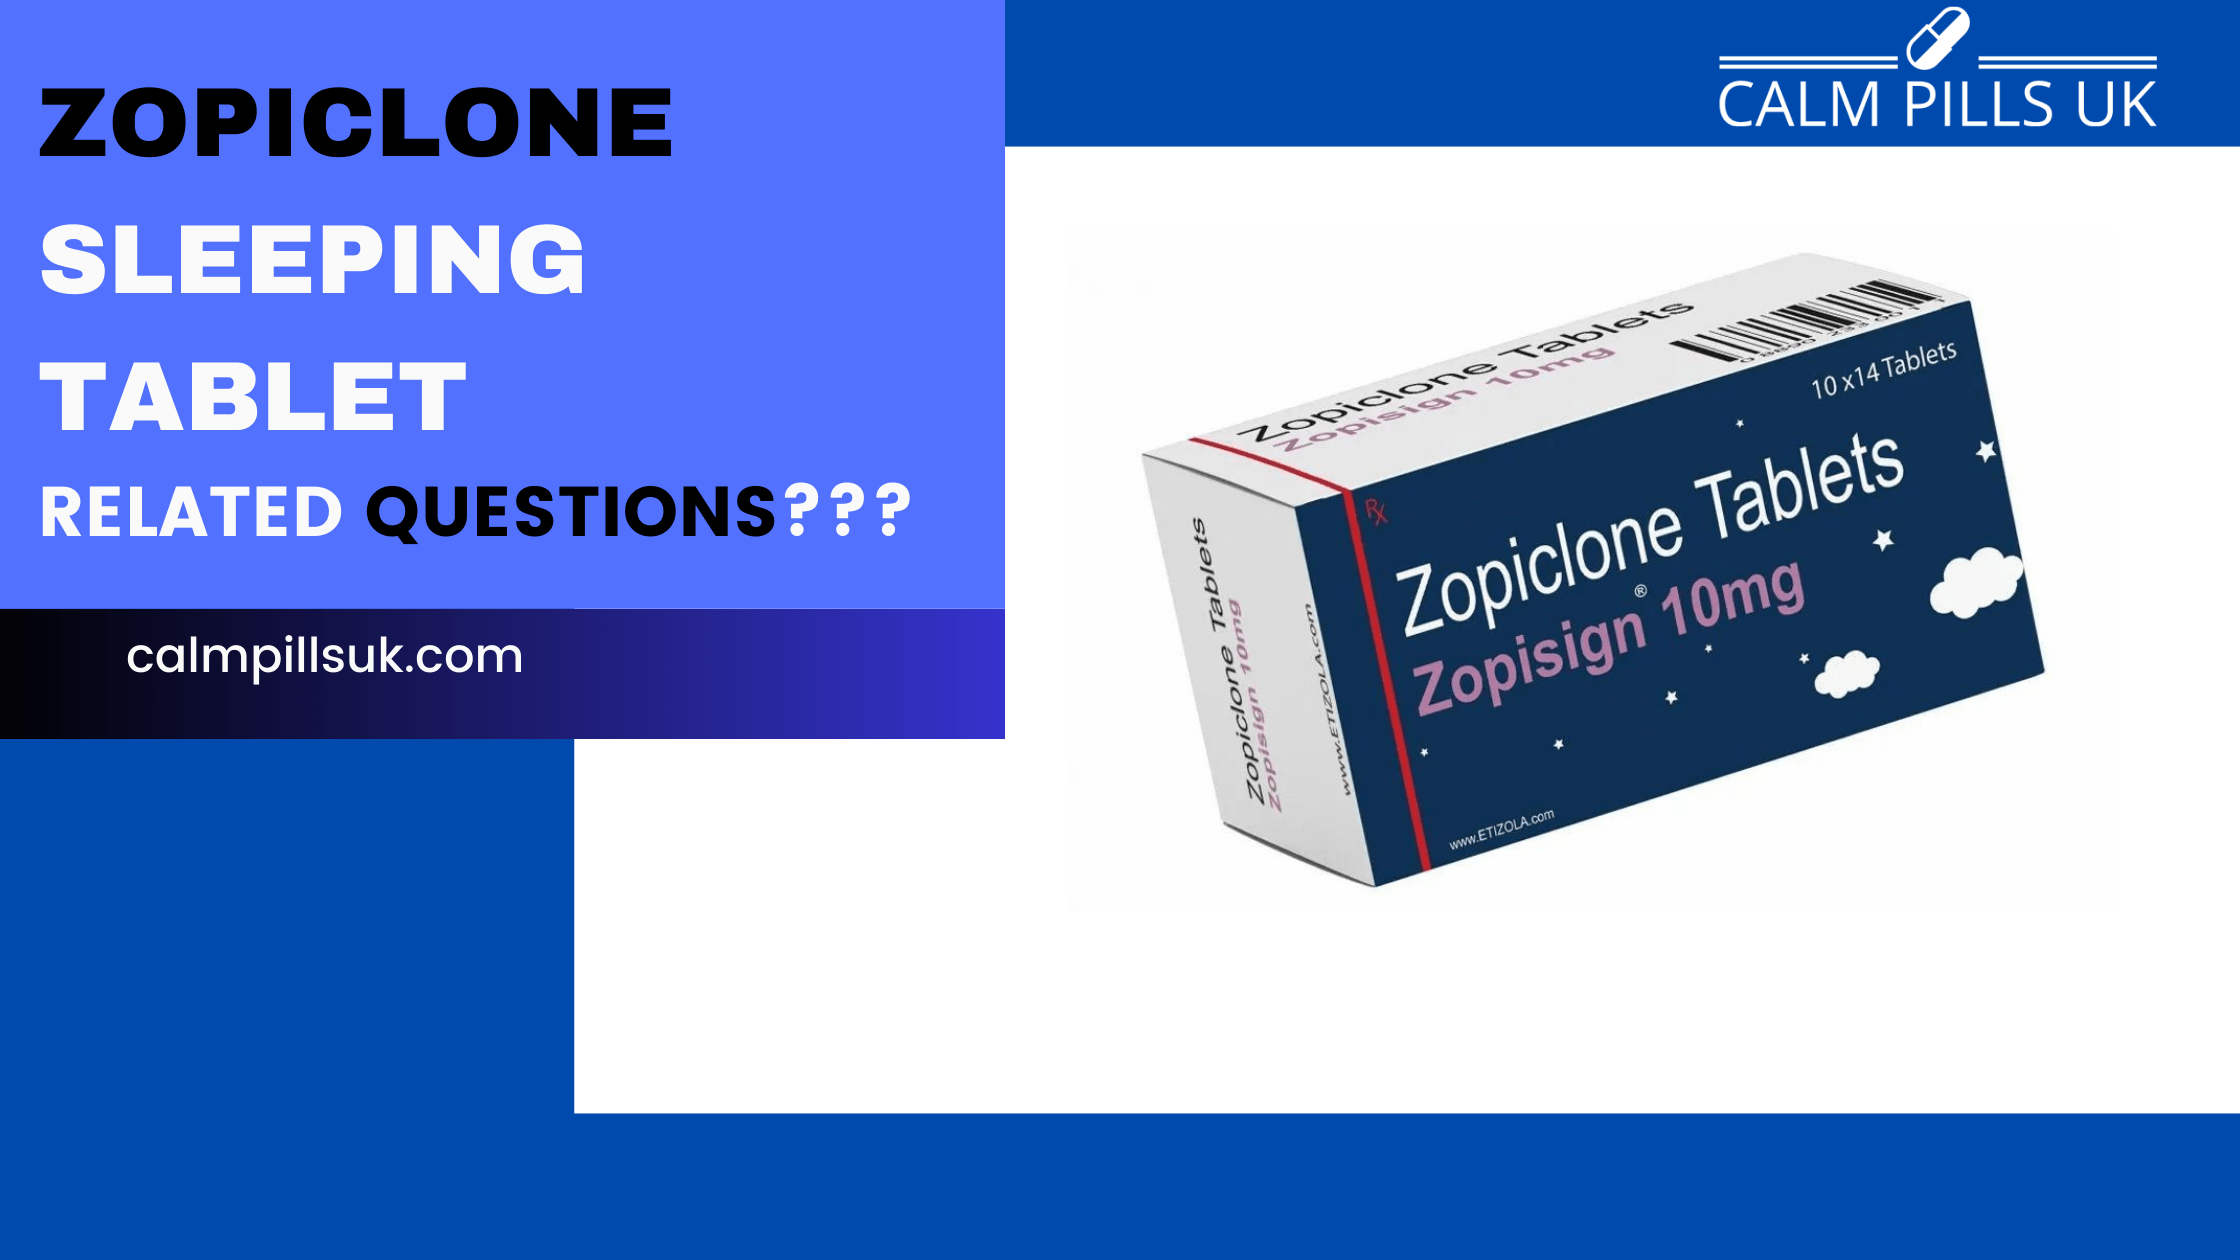 Where Can I Buy Zopiclone Sleeping Tablet?